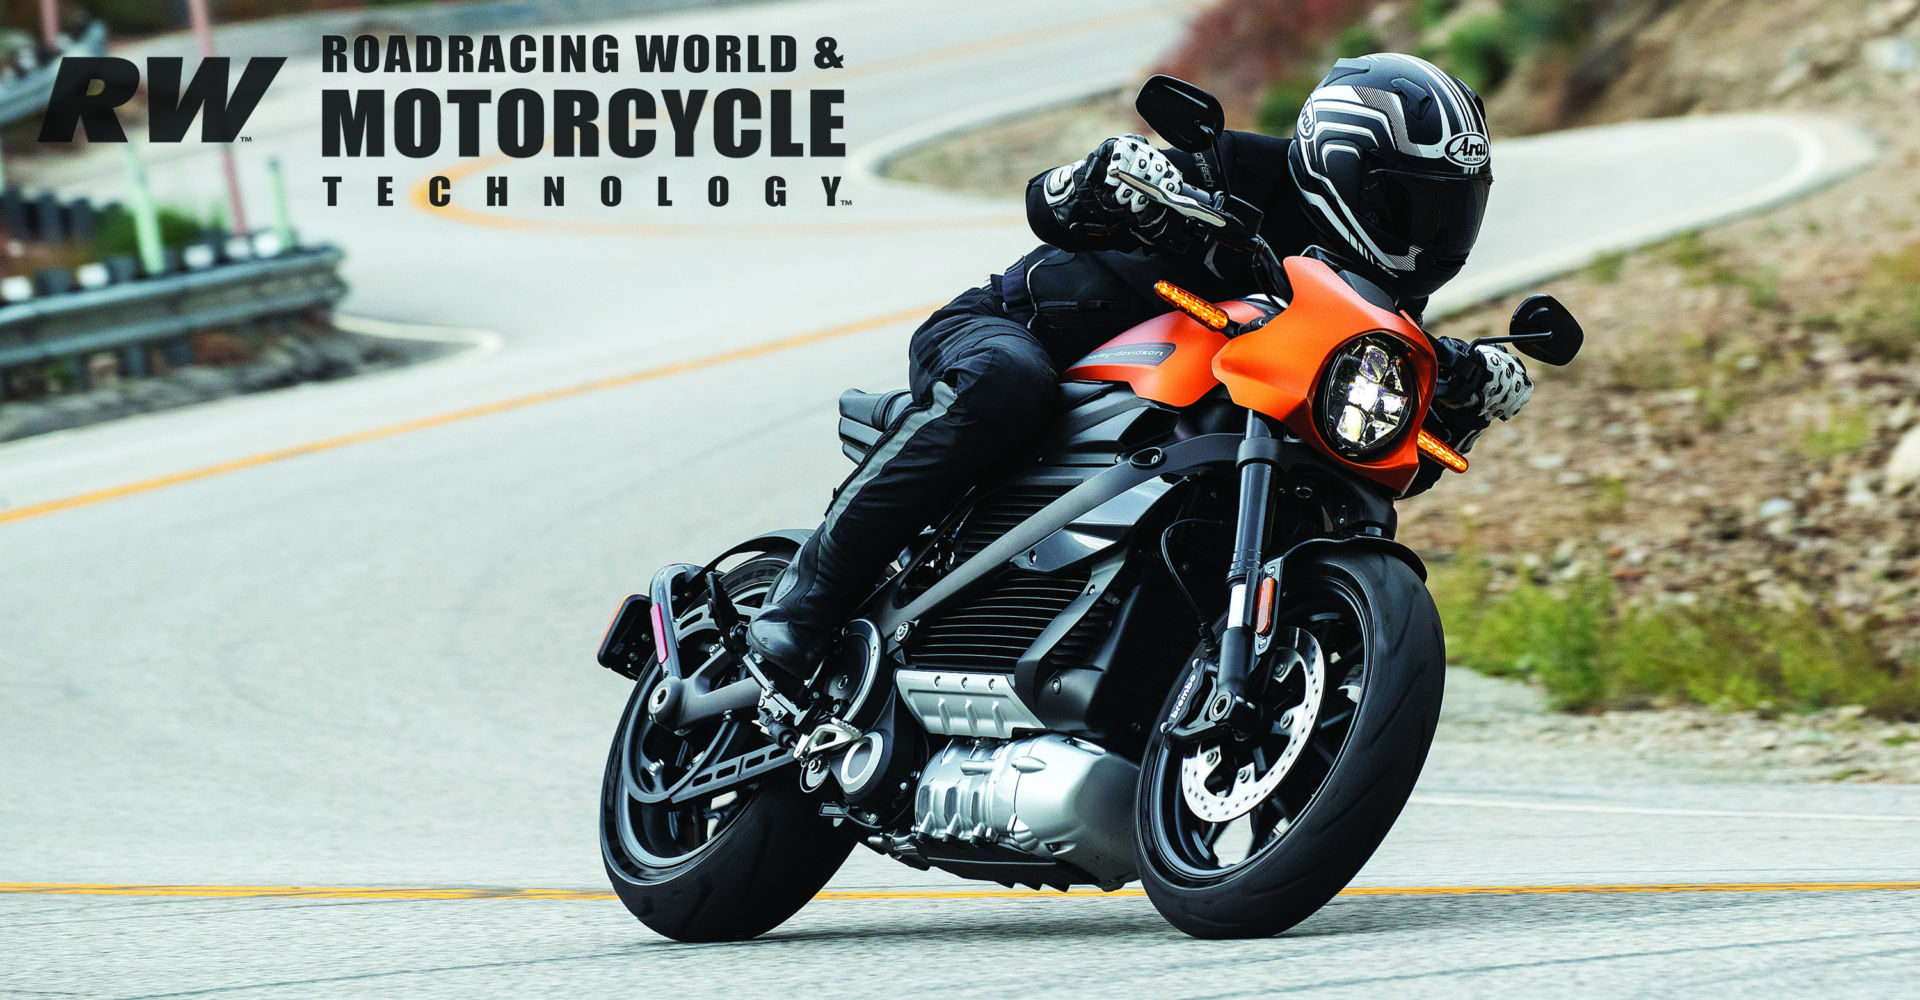 Harley Davidson Launches Livewire As An Electric Motorcycle Brand Roadracing World Magazine Motorcycle Riding Racing Tech News